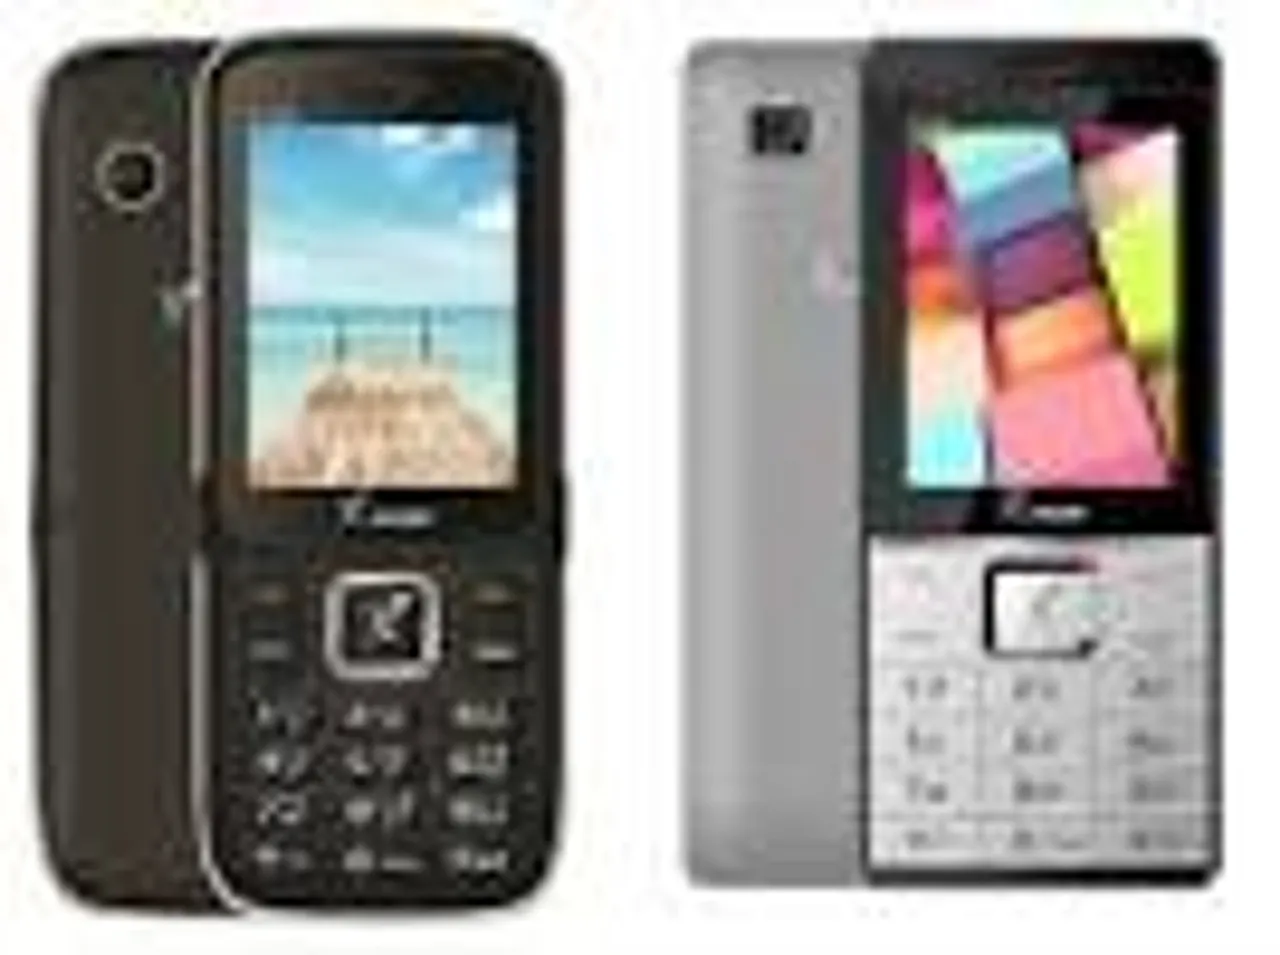 Ziox Mobiles announces 2 feature phones at Rs. 1,343/- & Rs.1,443/-